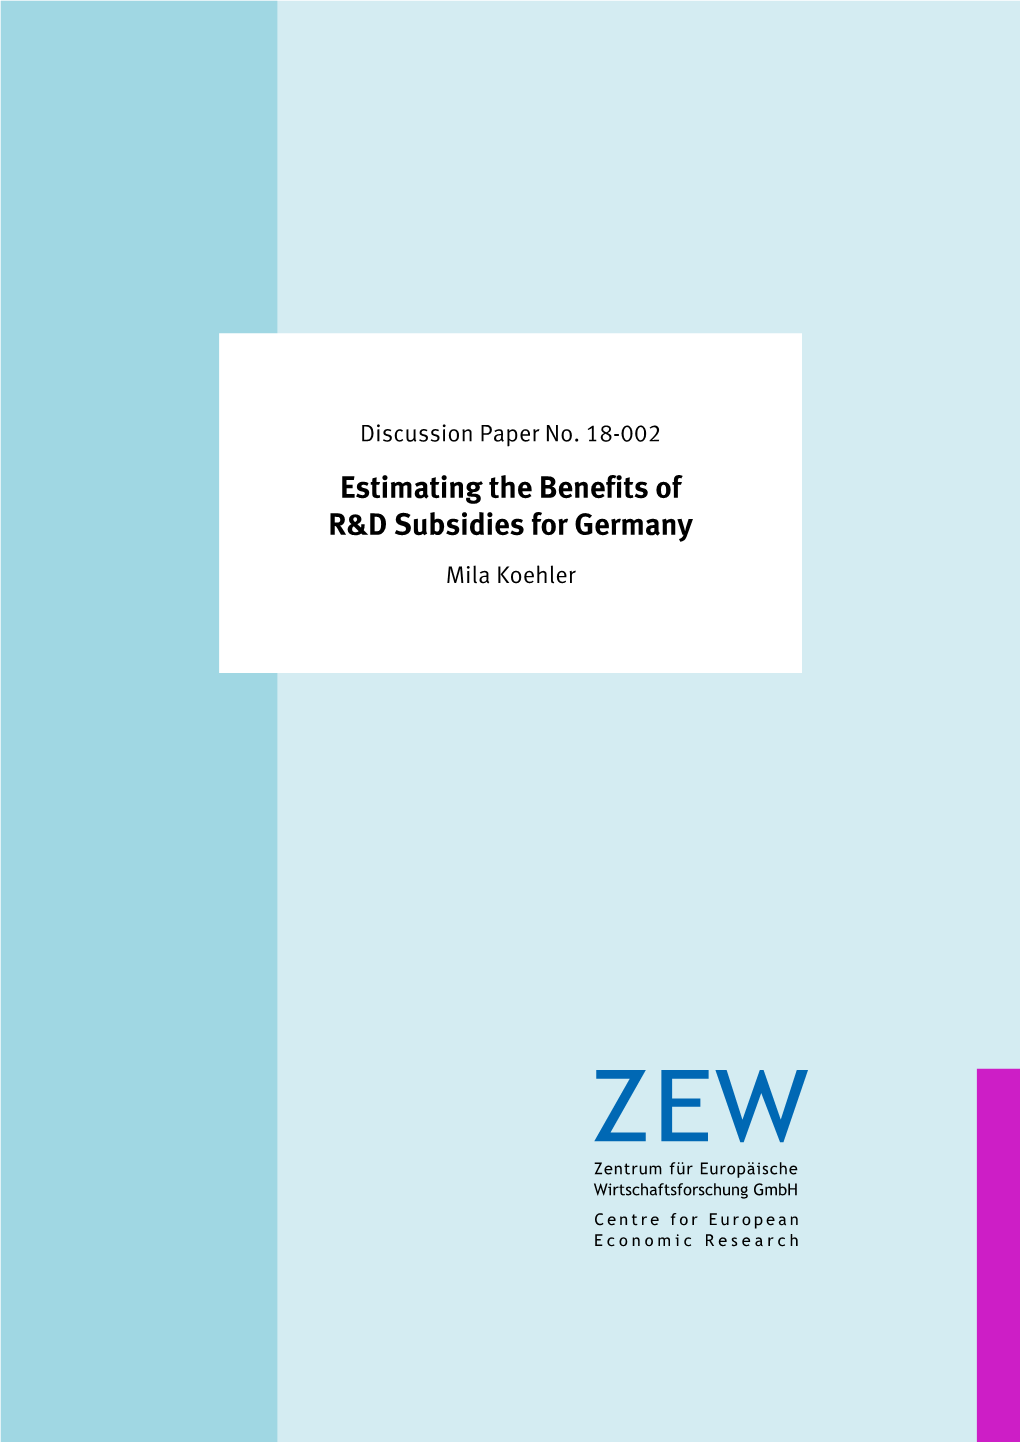 Estimating the Benefits of R&D Subsidies for Germany